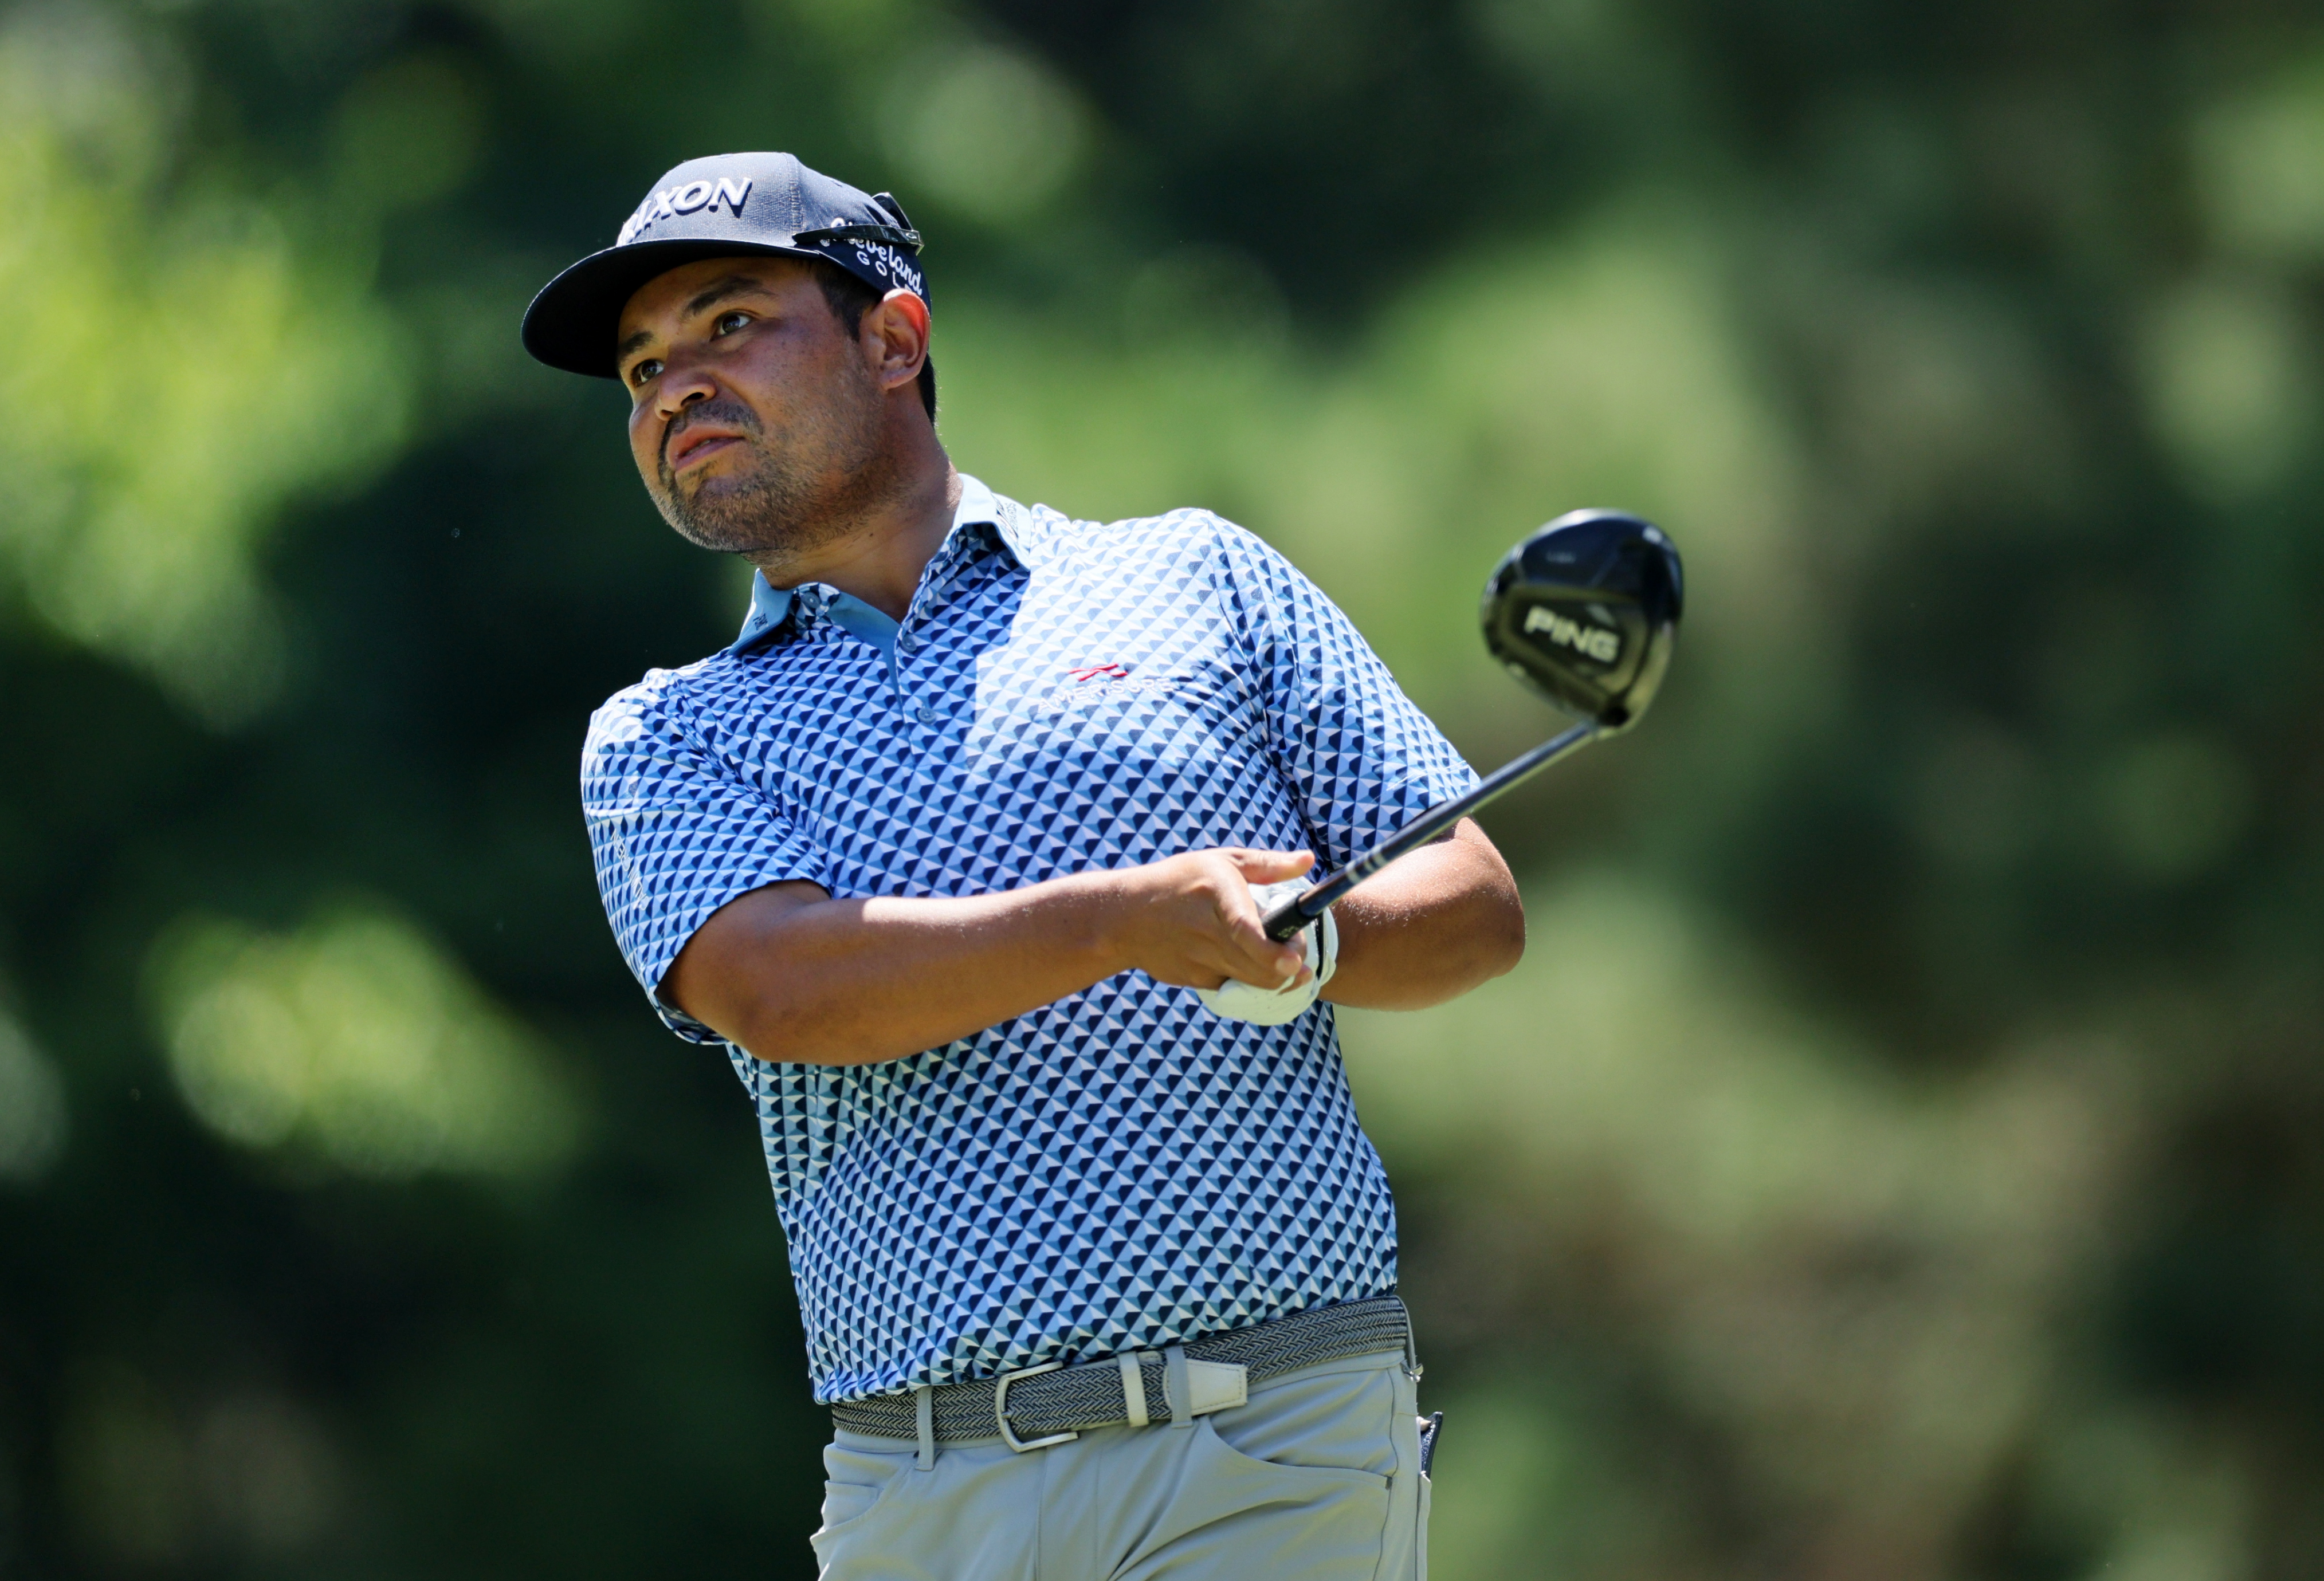 J.J. Spaun of the United States plays his shot from the seventh tee during the third round of the FedEx St. Jude Championship at TPC Southwind on August 13, 2022 in Memphis, Tennessee.